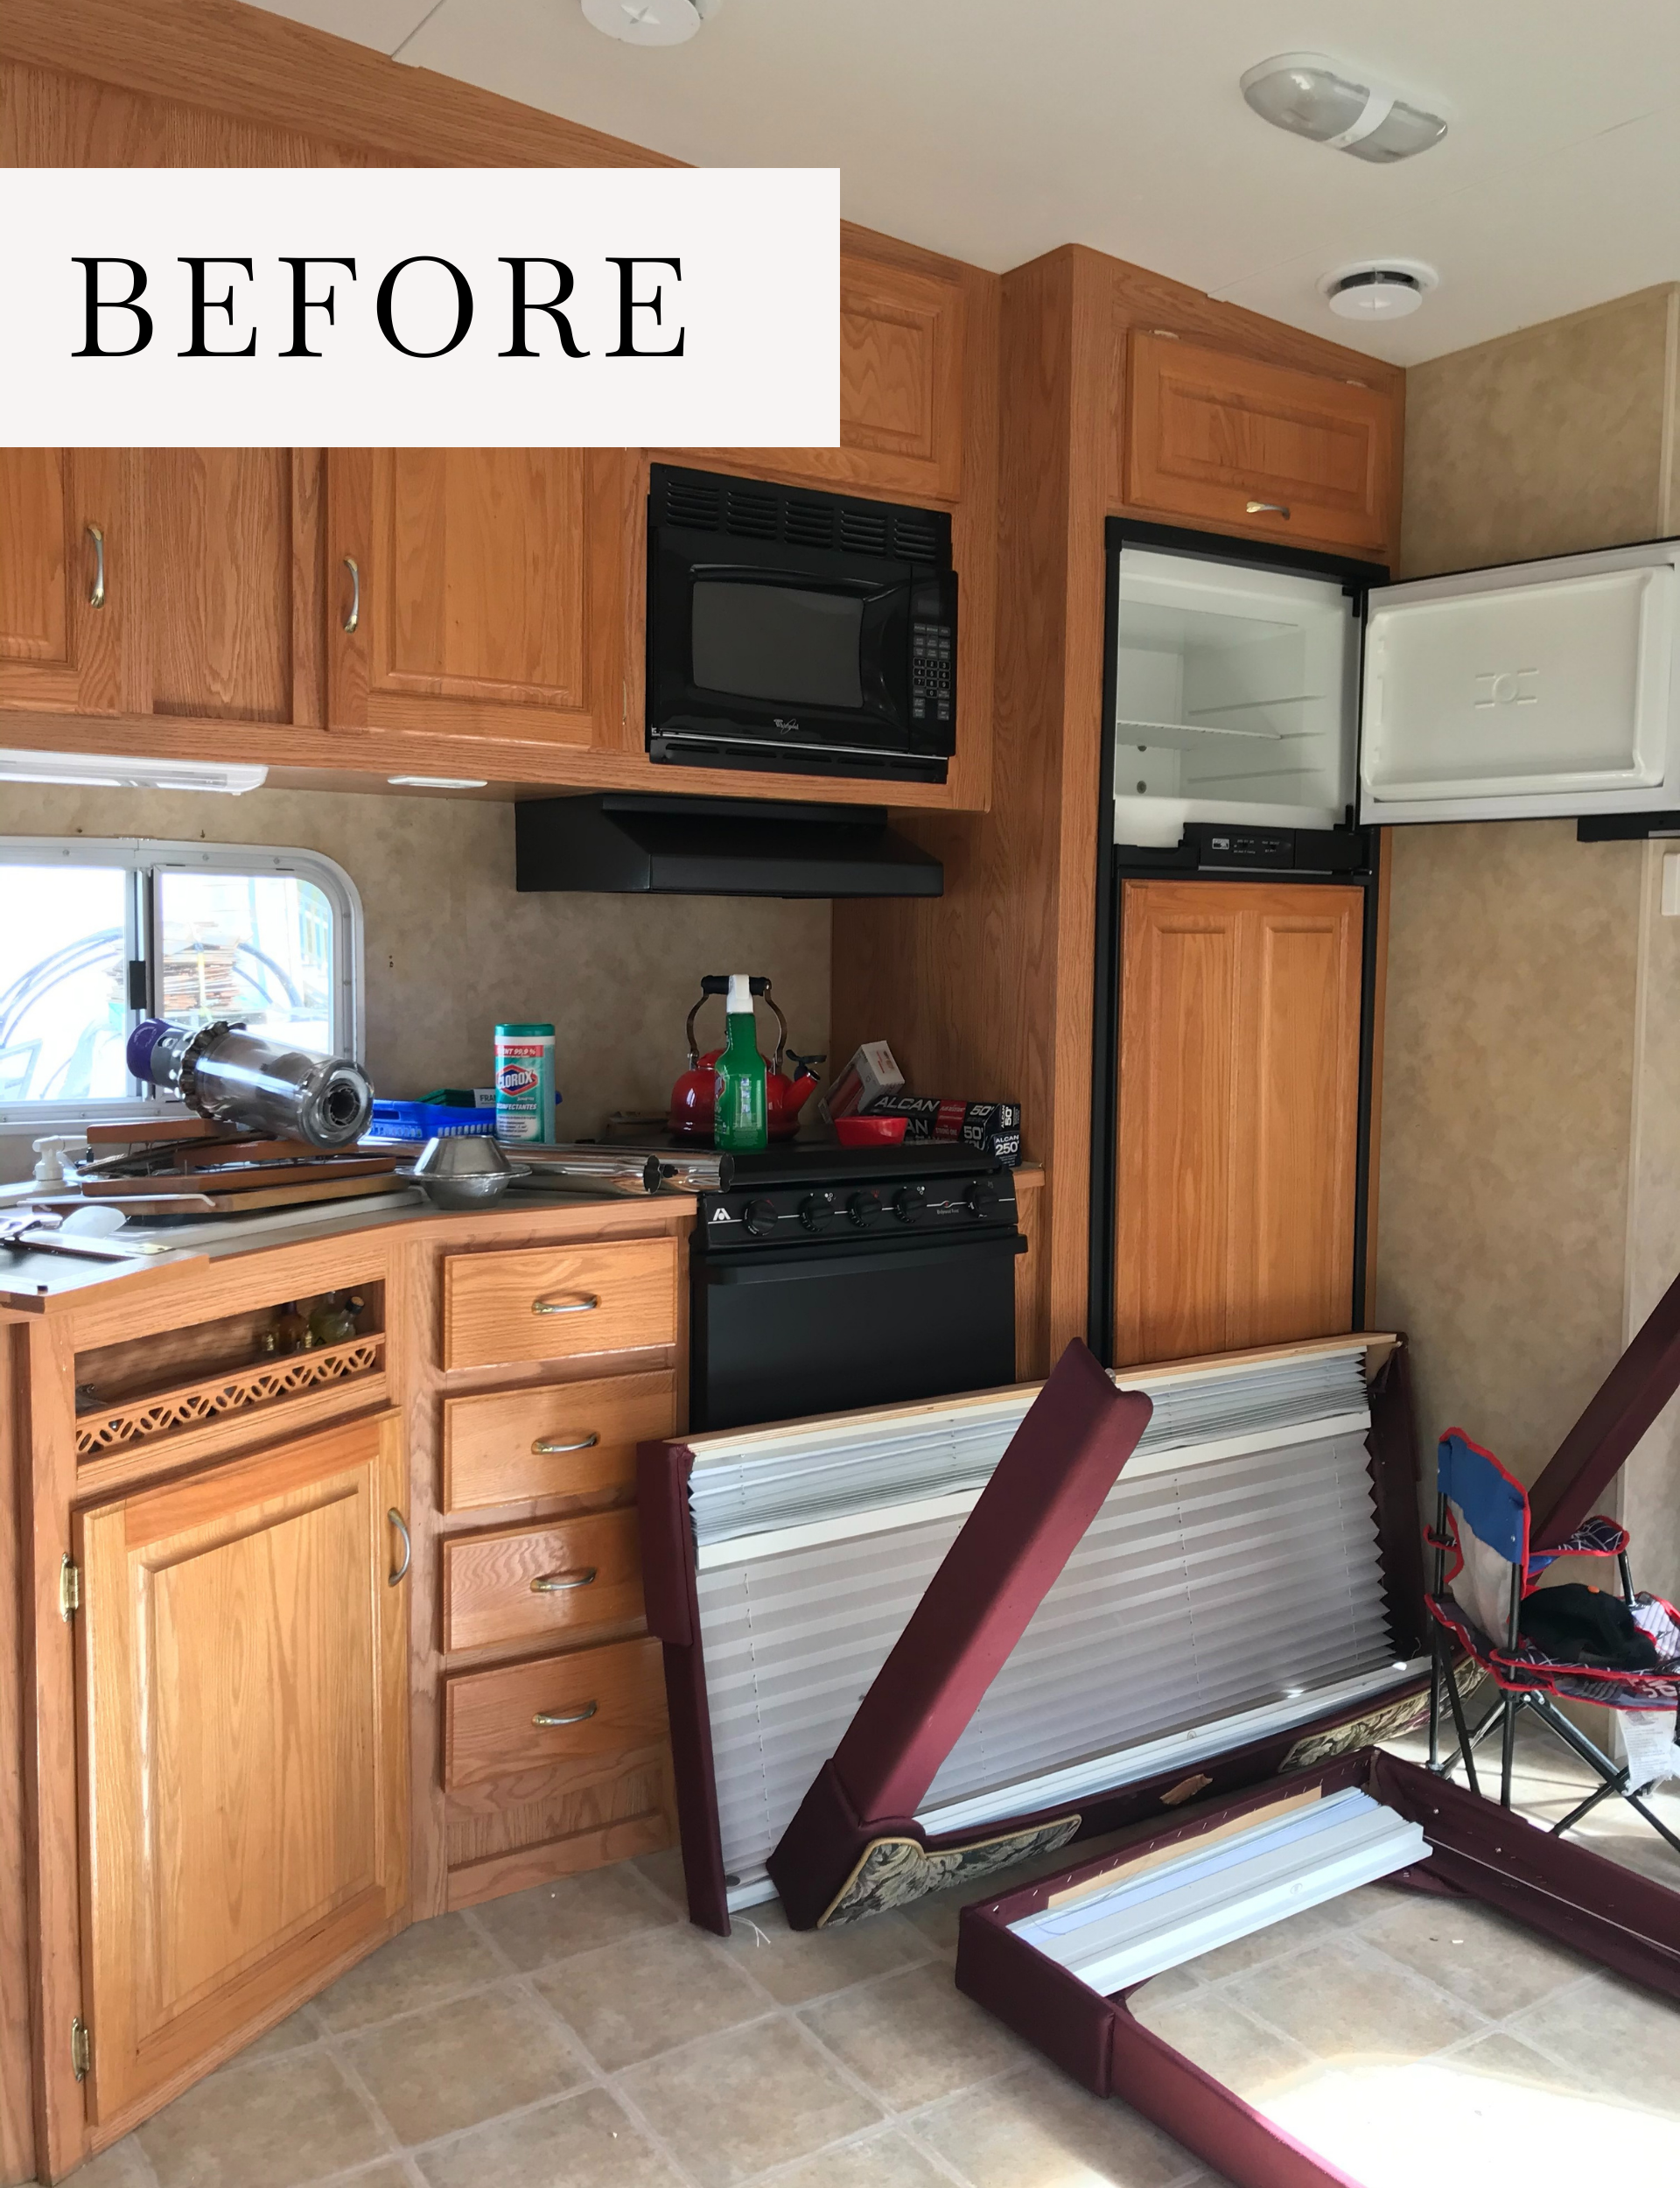 Our Camper Reveal Fraiche Living Before image of kitchen